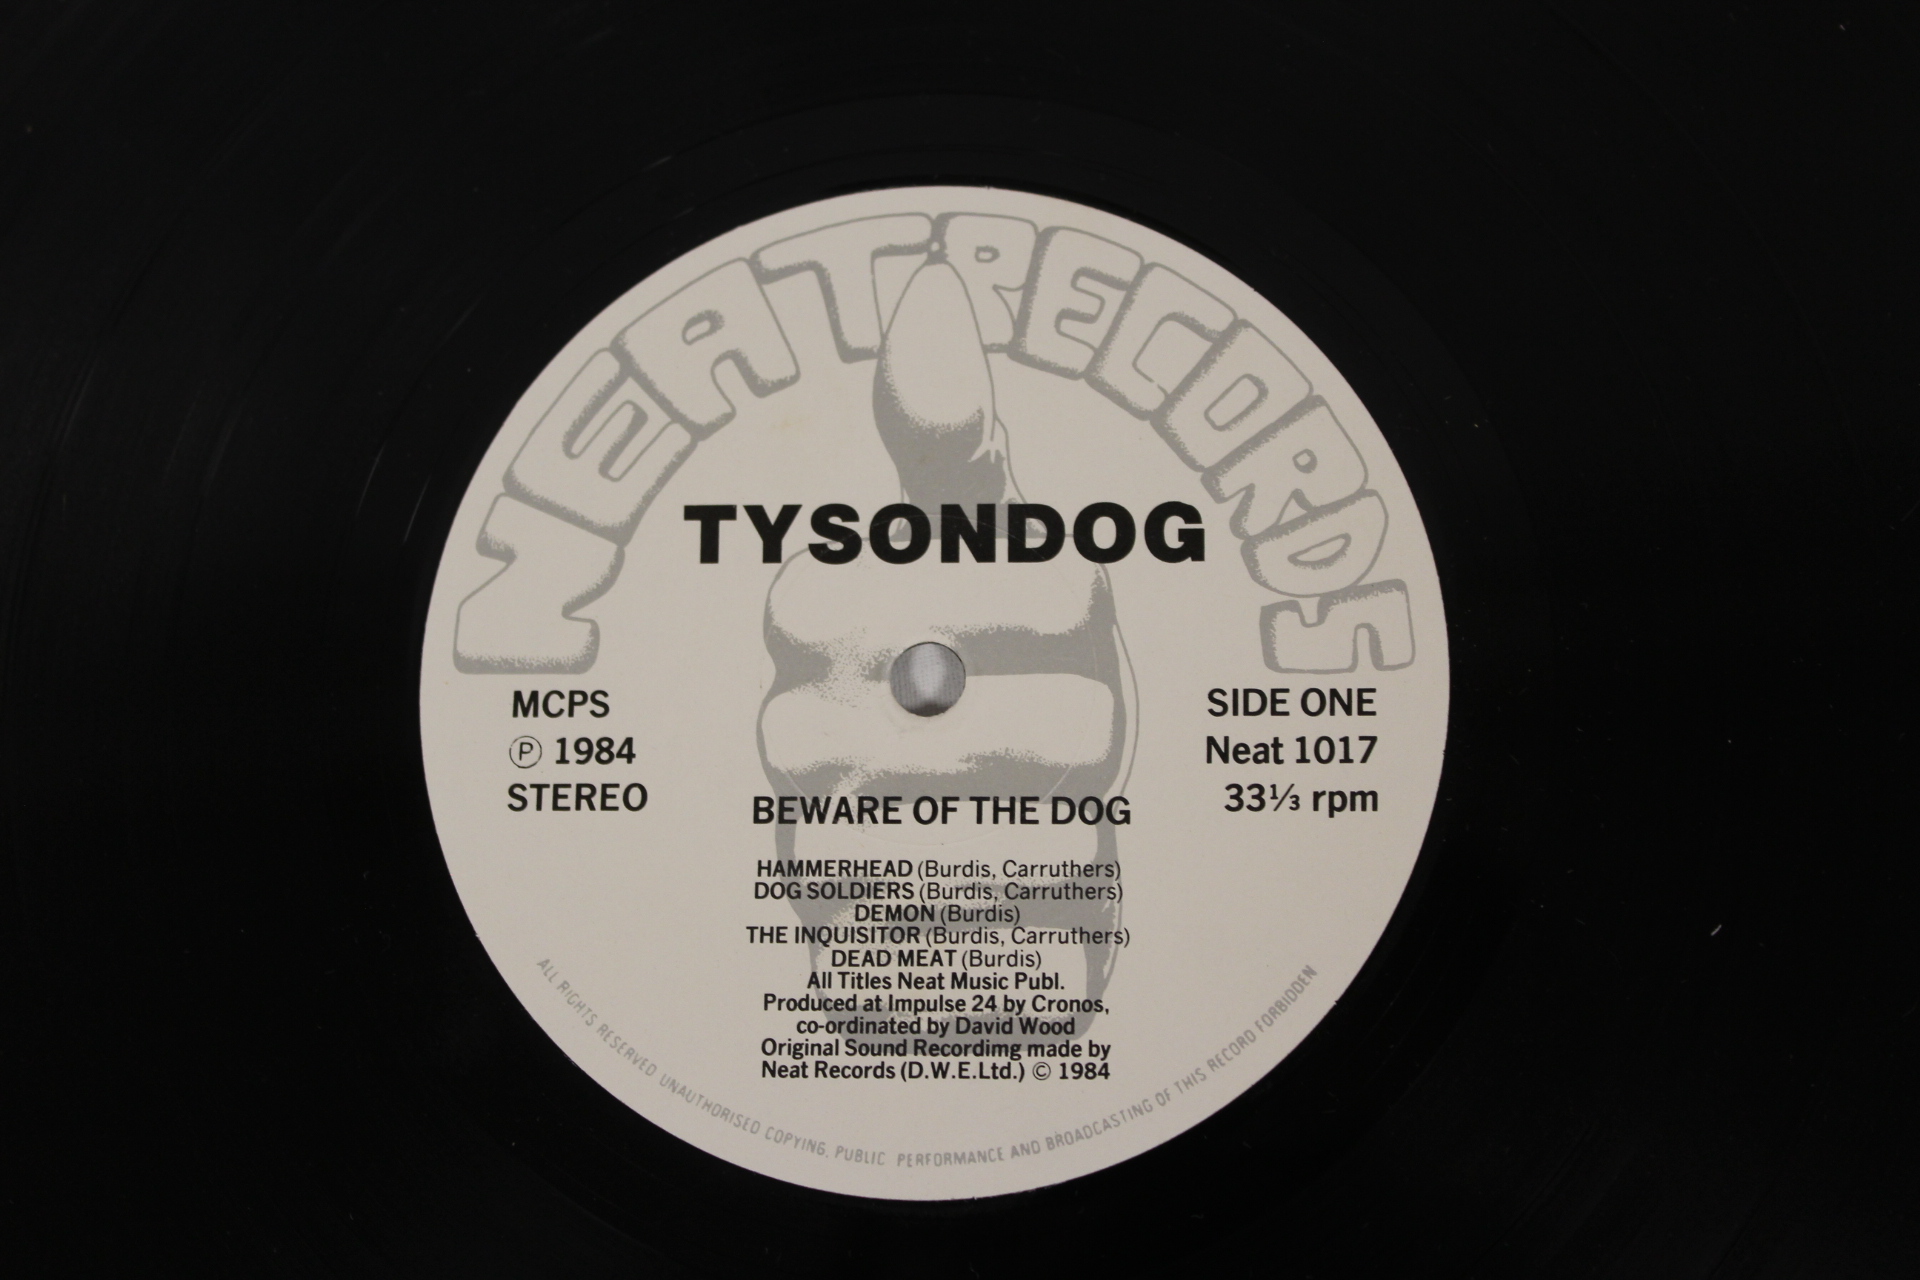 Collection of NWOBHM 12" singles and LPs to include Iron Maiden, 2 x Wrathchild,  Tyson Dog 'Beware - Image 7 of 7